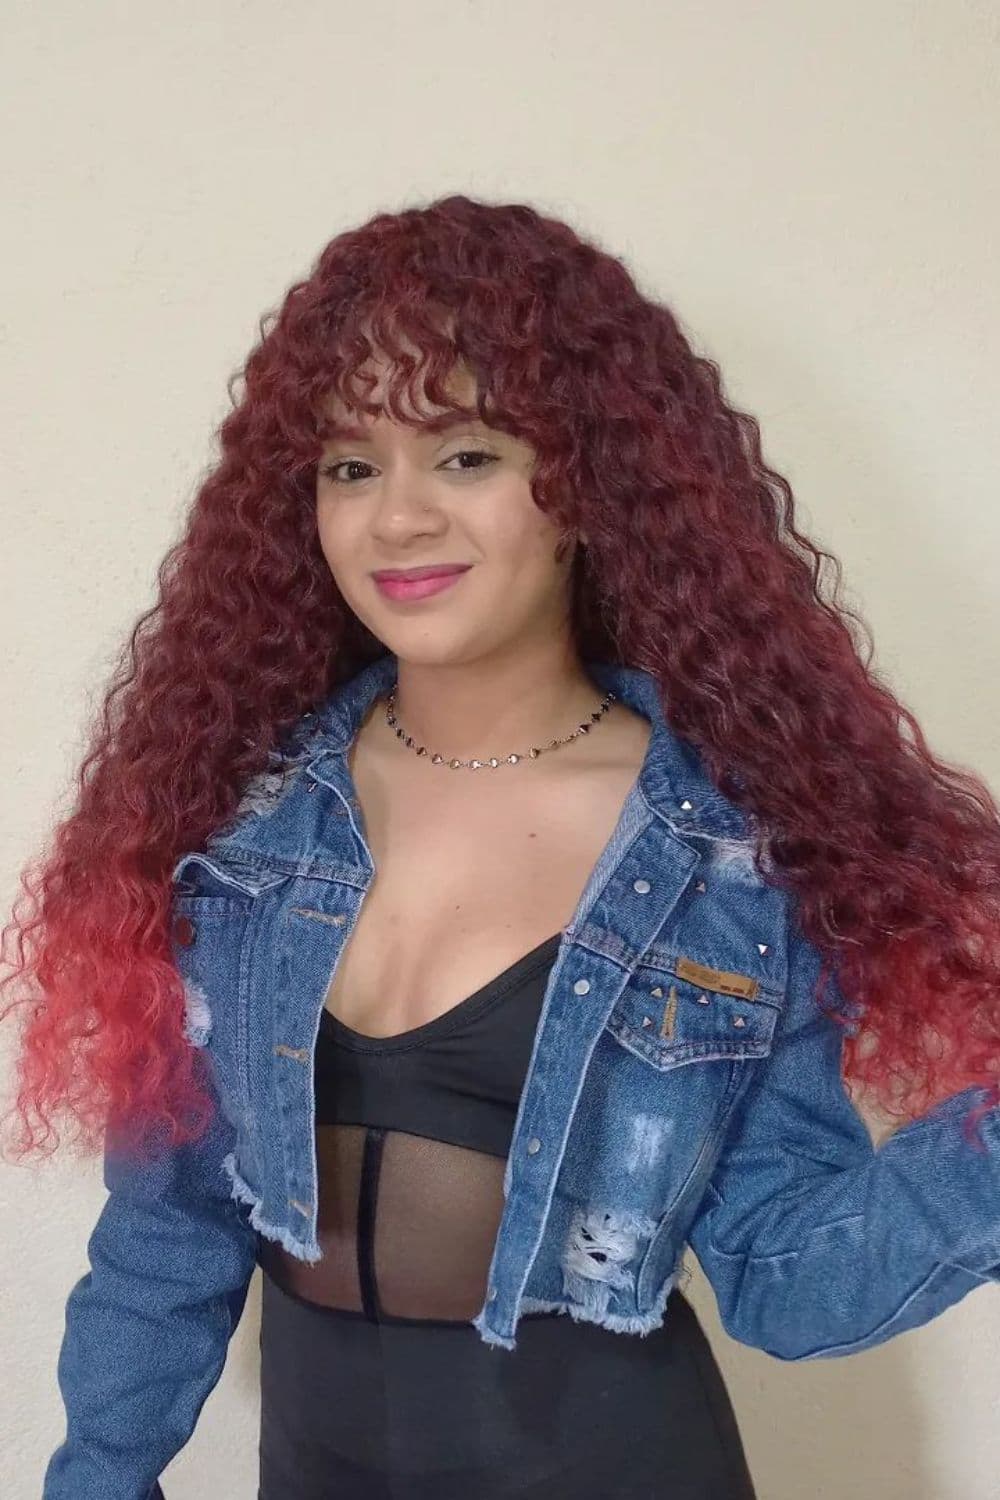 A woman wearing a black tube top, a denim jacket, and, red curly crochet with bangs.